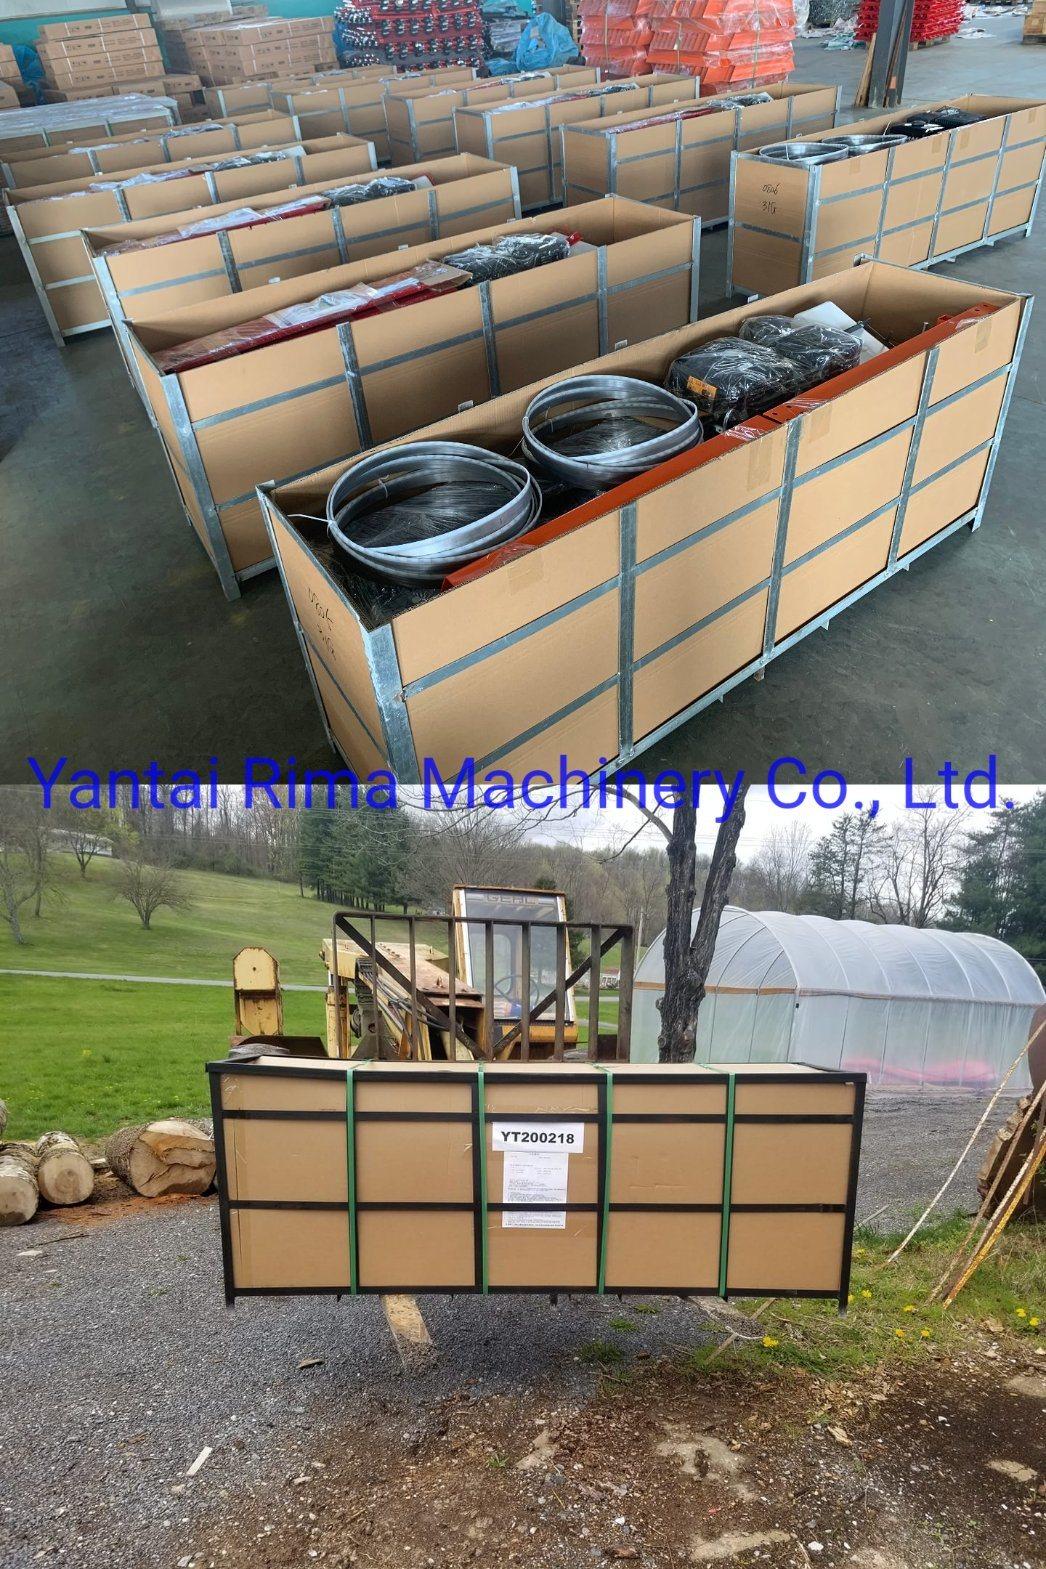 Portable Sawmill for Sale Deluxe Portable Sawmill